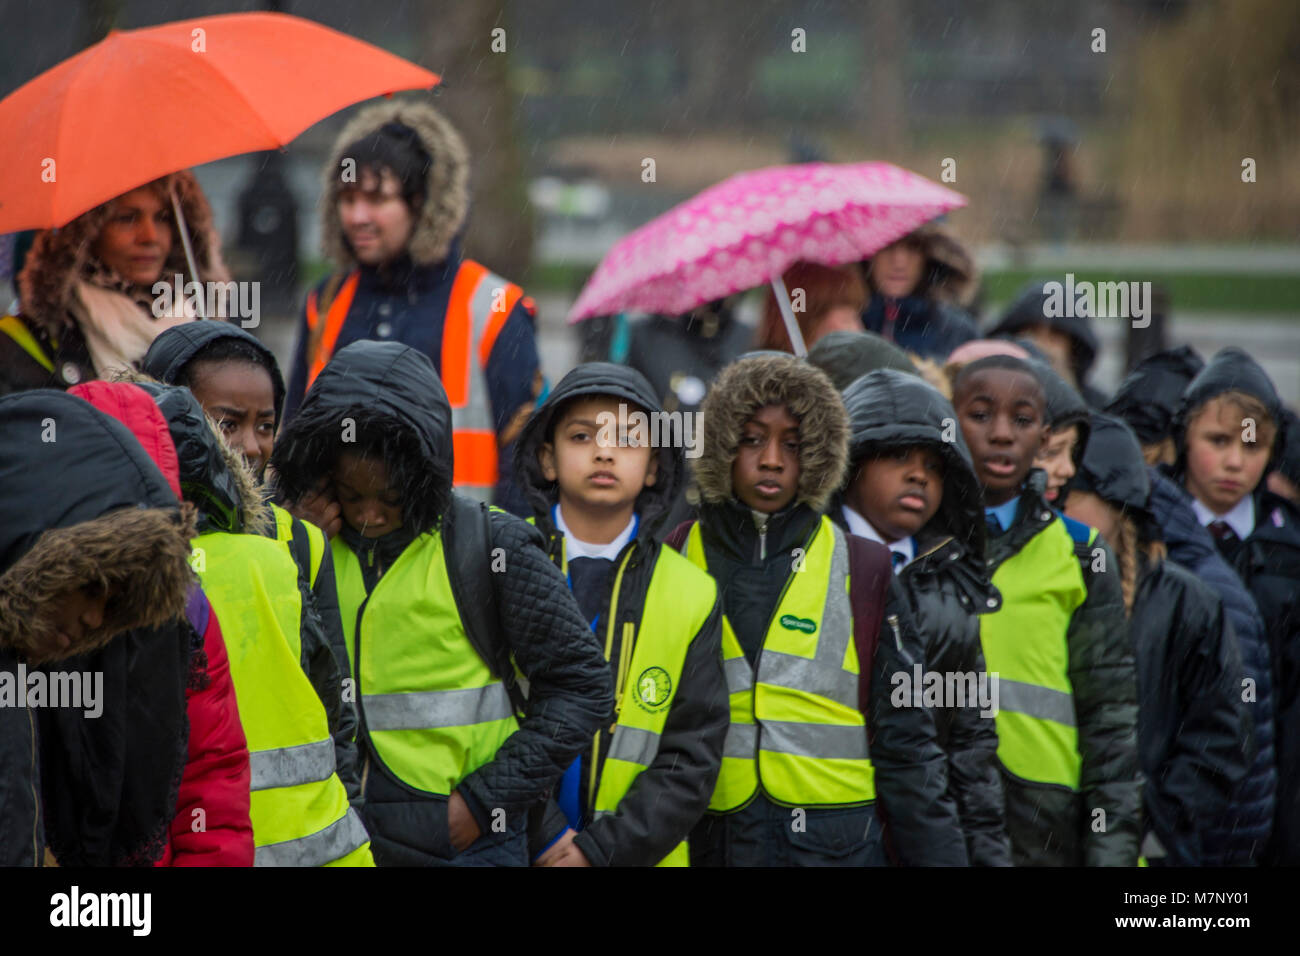 London, UK. 12th March, 2018. The rain fell dampening some spirits - The Band of the Coldstream Guards accompanies 400 members of the Commonwealth Children’s Choir in a musical celebration of Commonwealth Day 2018. The performance, on Horse Guards parade, included a world premiere of a new composition, “To be a Friend”, dedicated to Her Majesty The Queen (and marking the Commonwealth Heads of Government Meeting (CHOGM) being held in London in April 2018). It was composed by Major Simon Haw MBE. Credit: Guy Bell/Alamy Live News Stock Photo